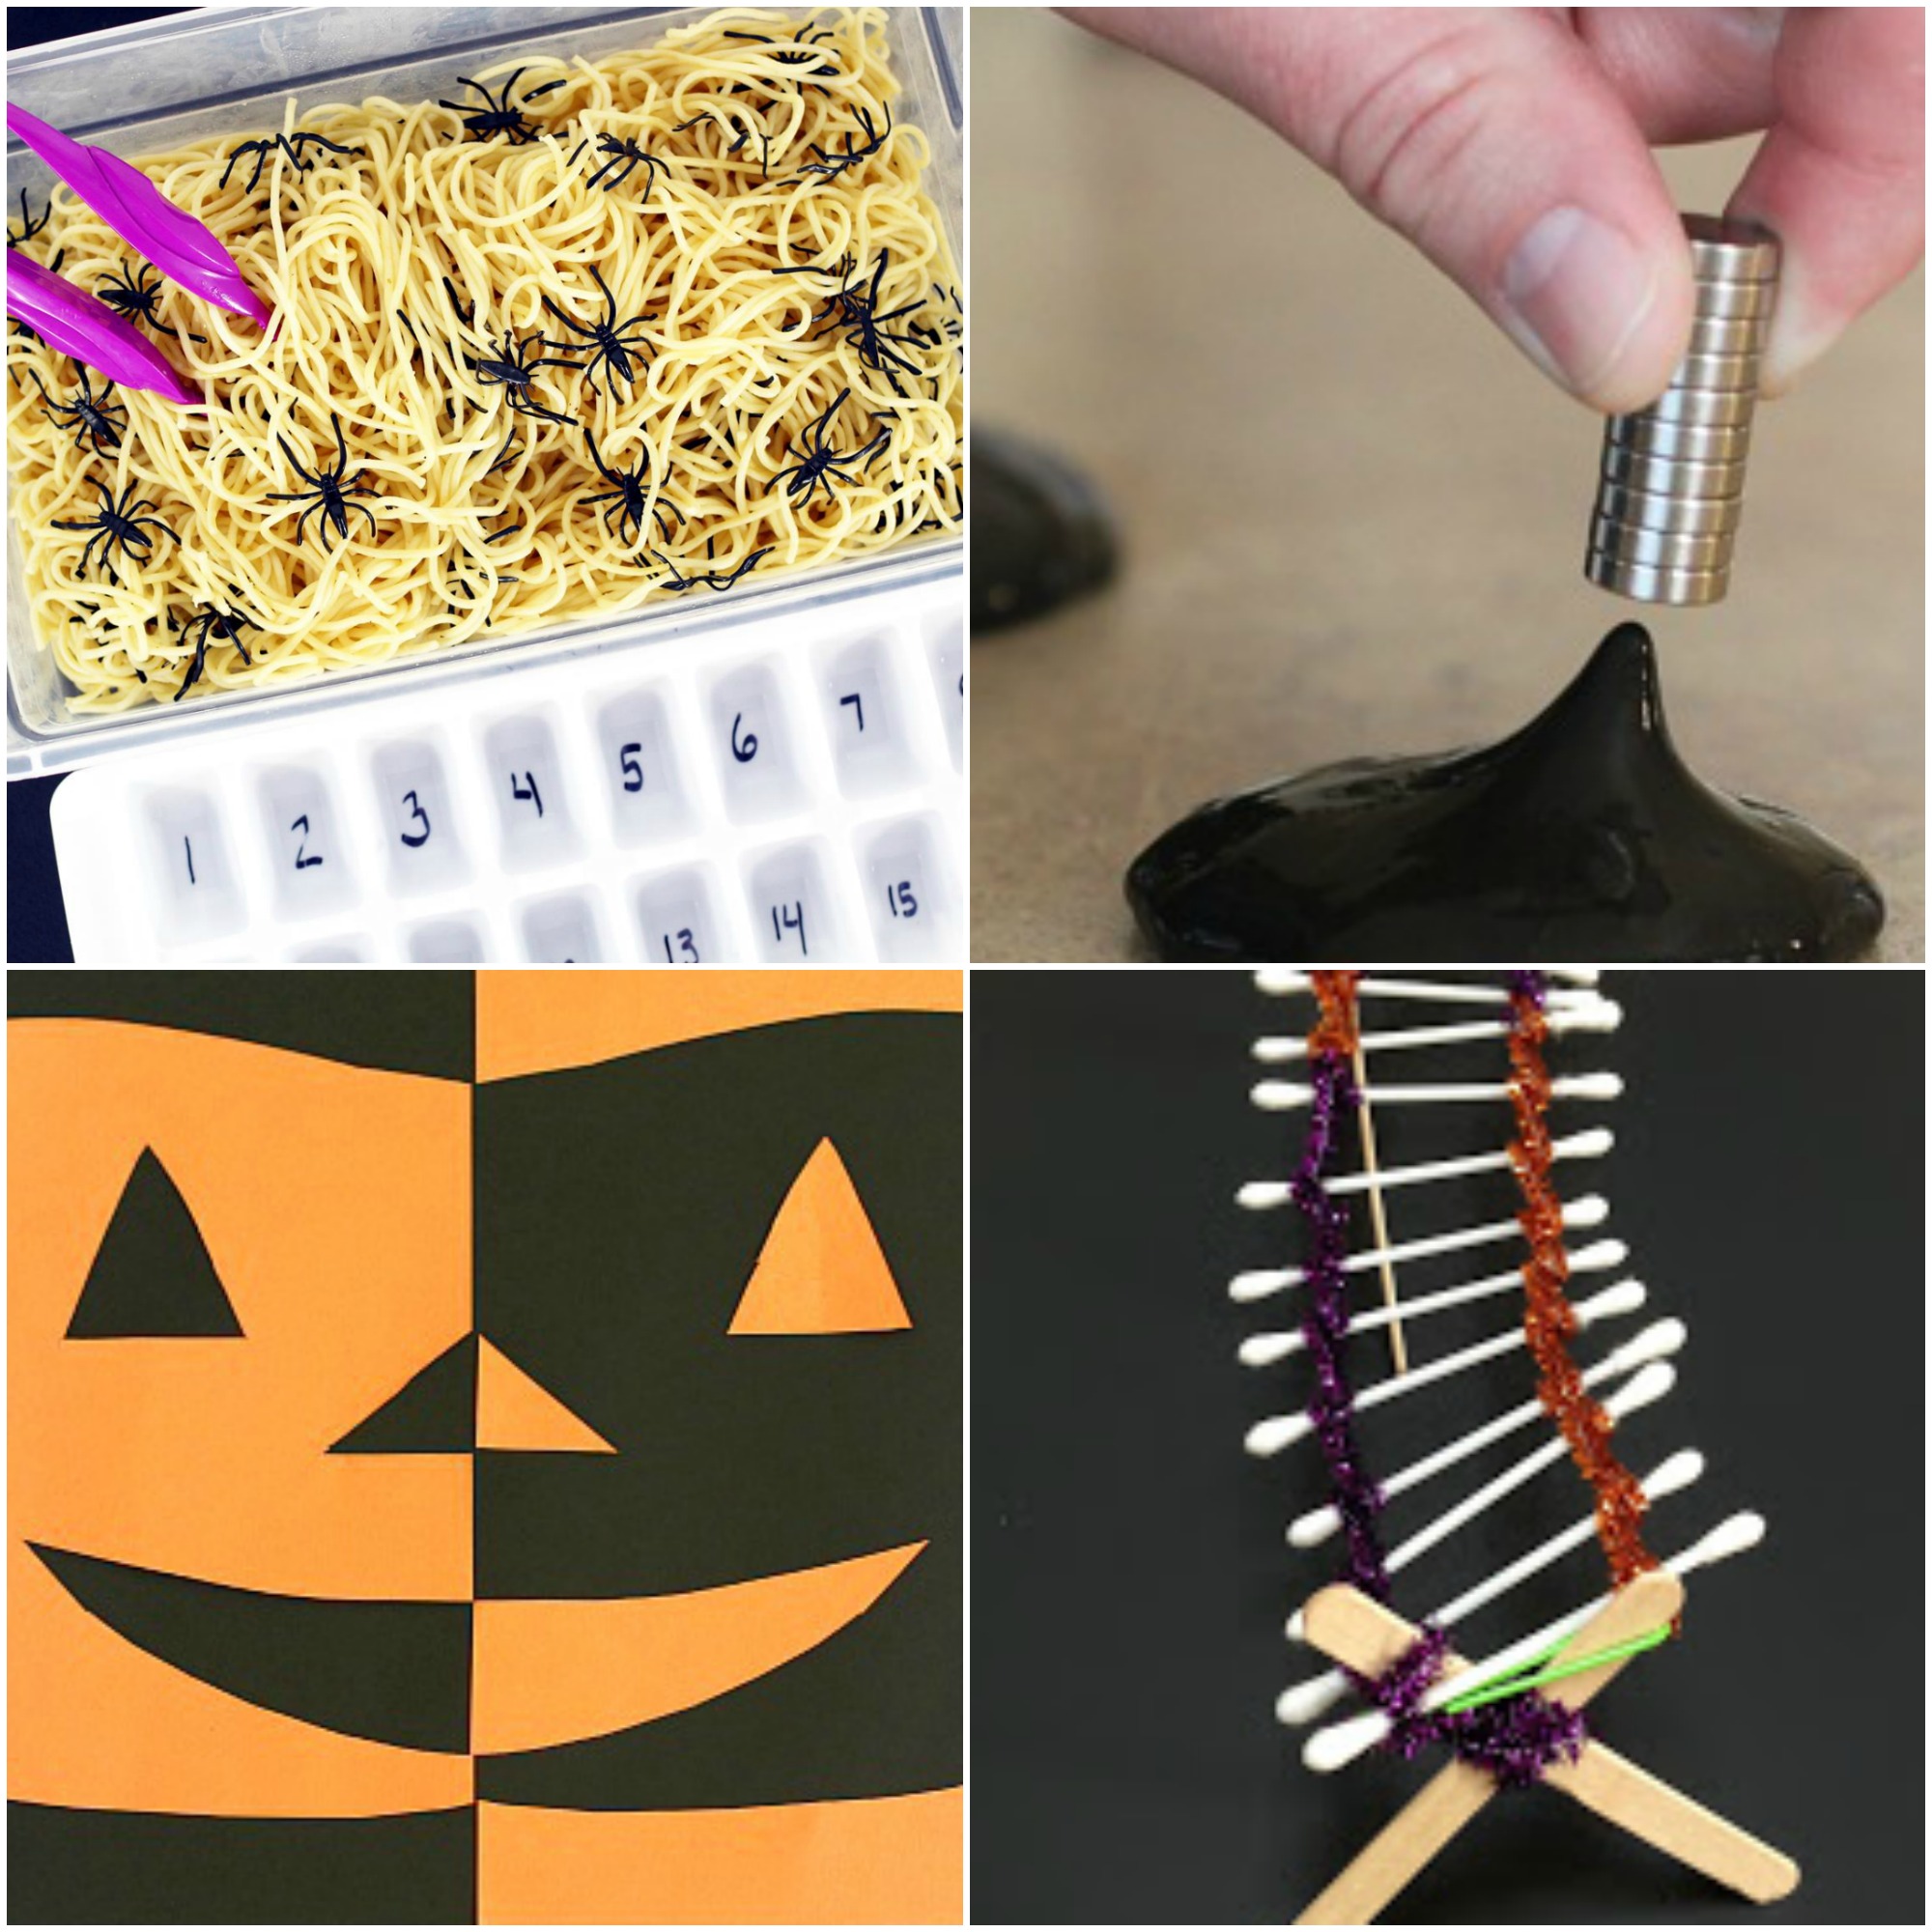 All students love Halloween! You can use that natural excitement to encourage your students to learn more with Halloween STEM for little learners. This list is perfect for the month of October and without a doubt will wow your students with hands on learning they will never forget.